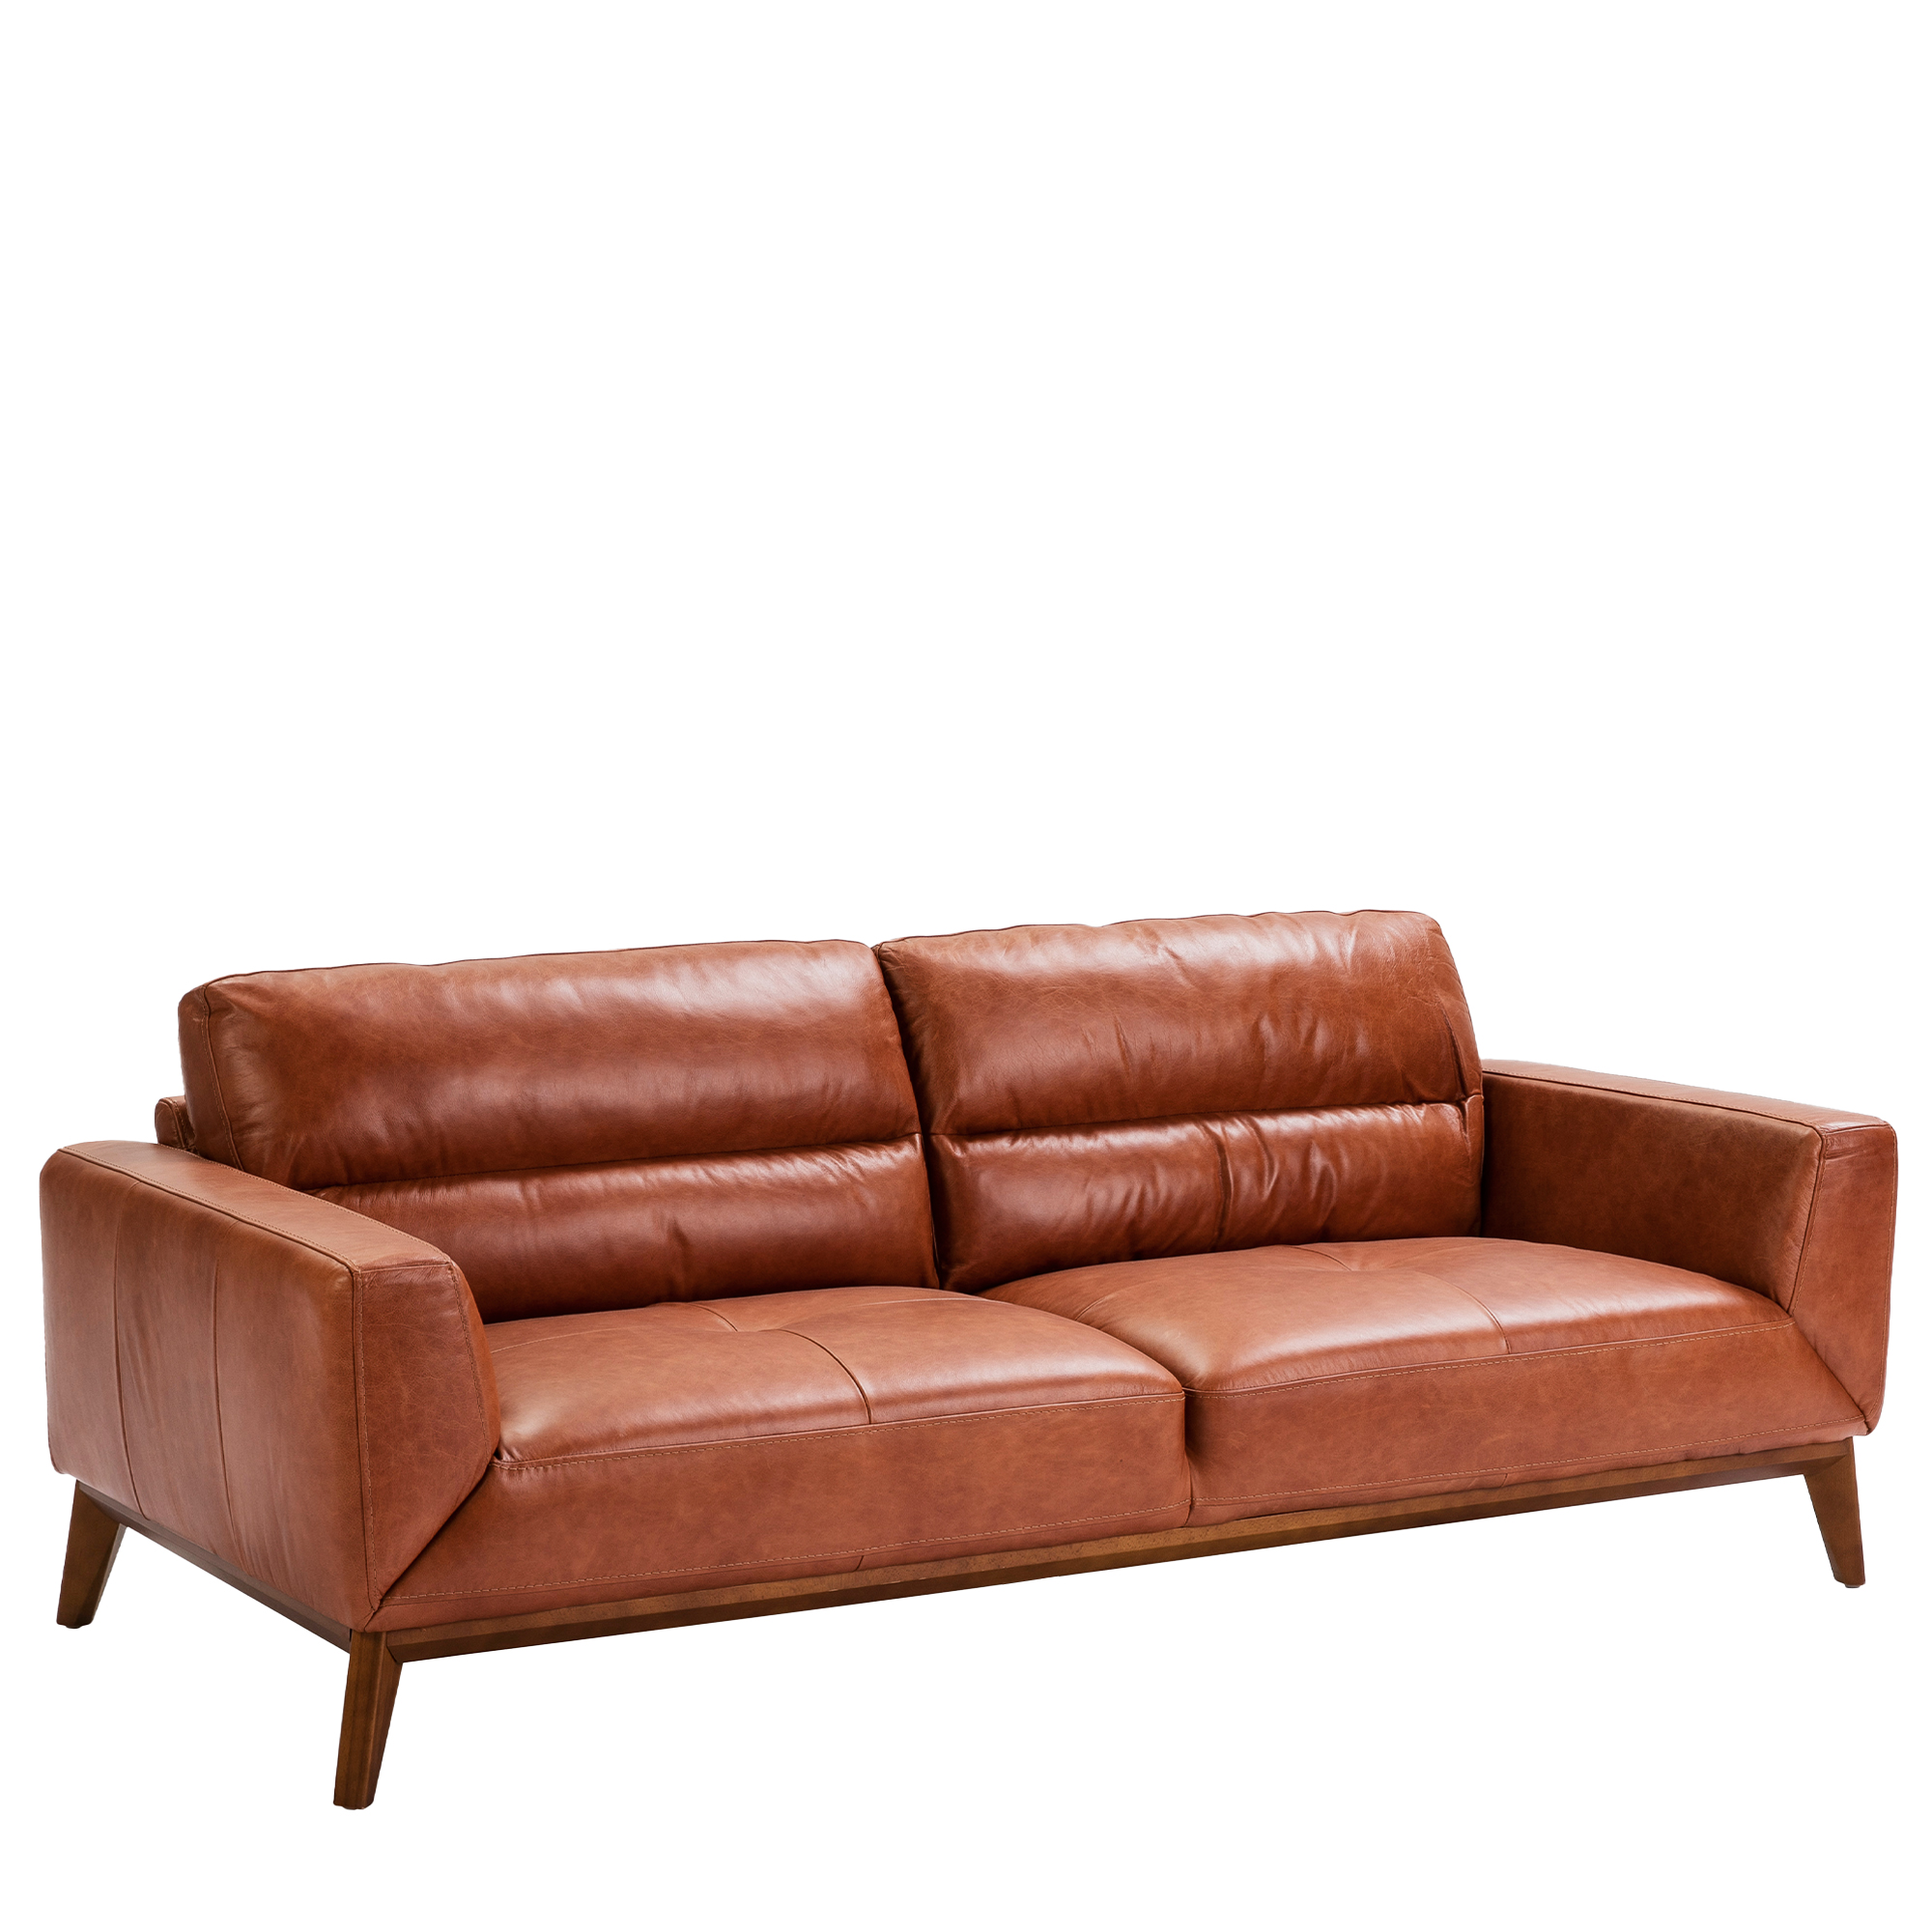 3-seater sofa upholstered in leather with Walnut wood legs